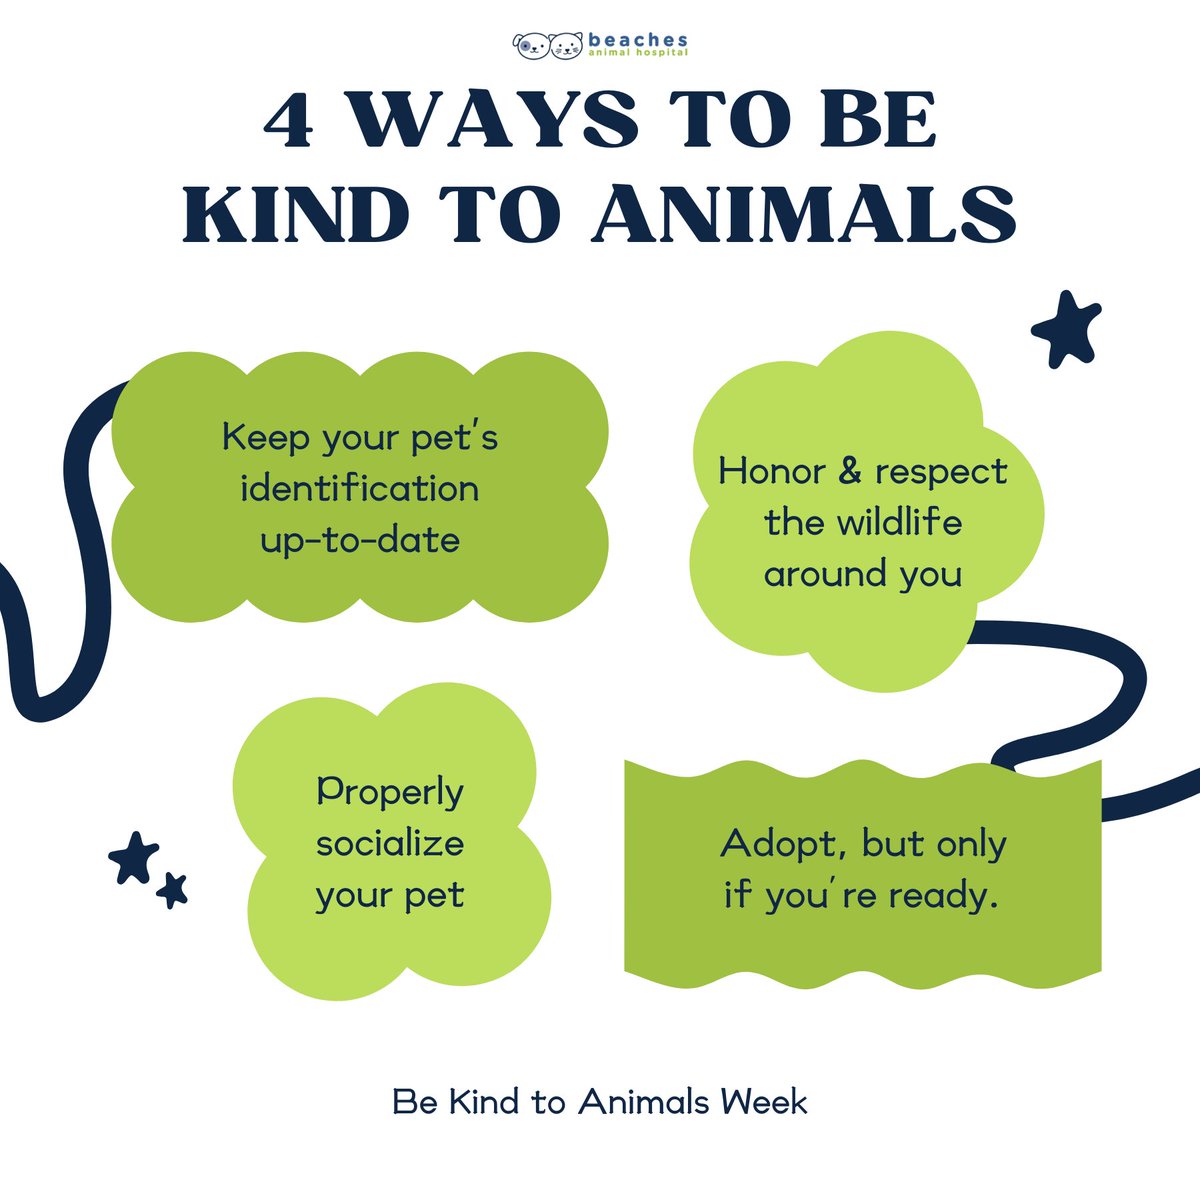 Transform the world with kindness! 🌟 Here are 4 simple ways to show love and care to animal friends everywhere. Let's make every day #BeKindToAnimalsDay 🐾

#love #instagood #cute #pet #petstagram #photooftheday #instamood #adorable #instapet